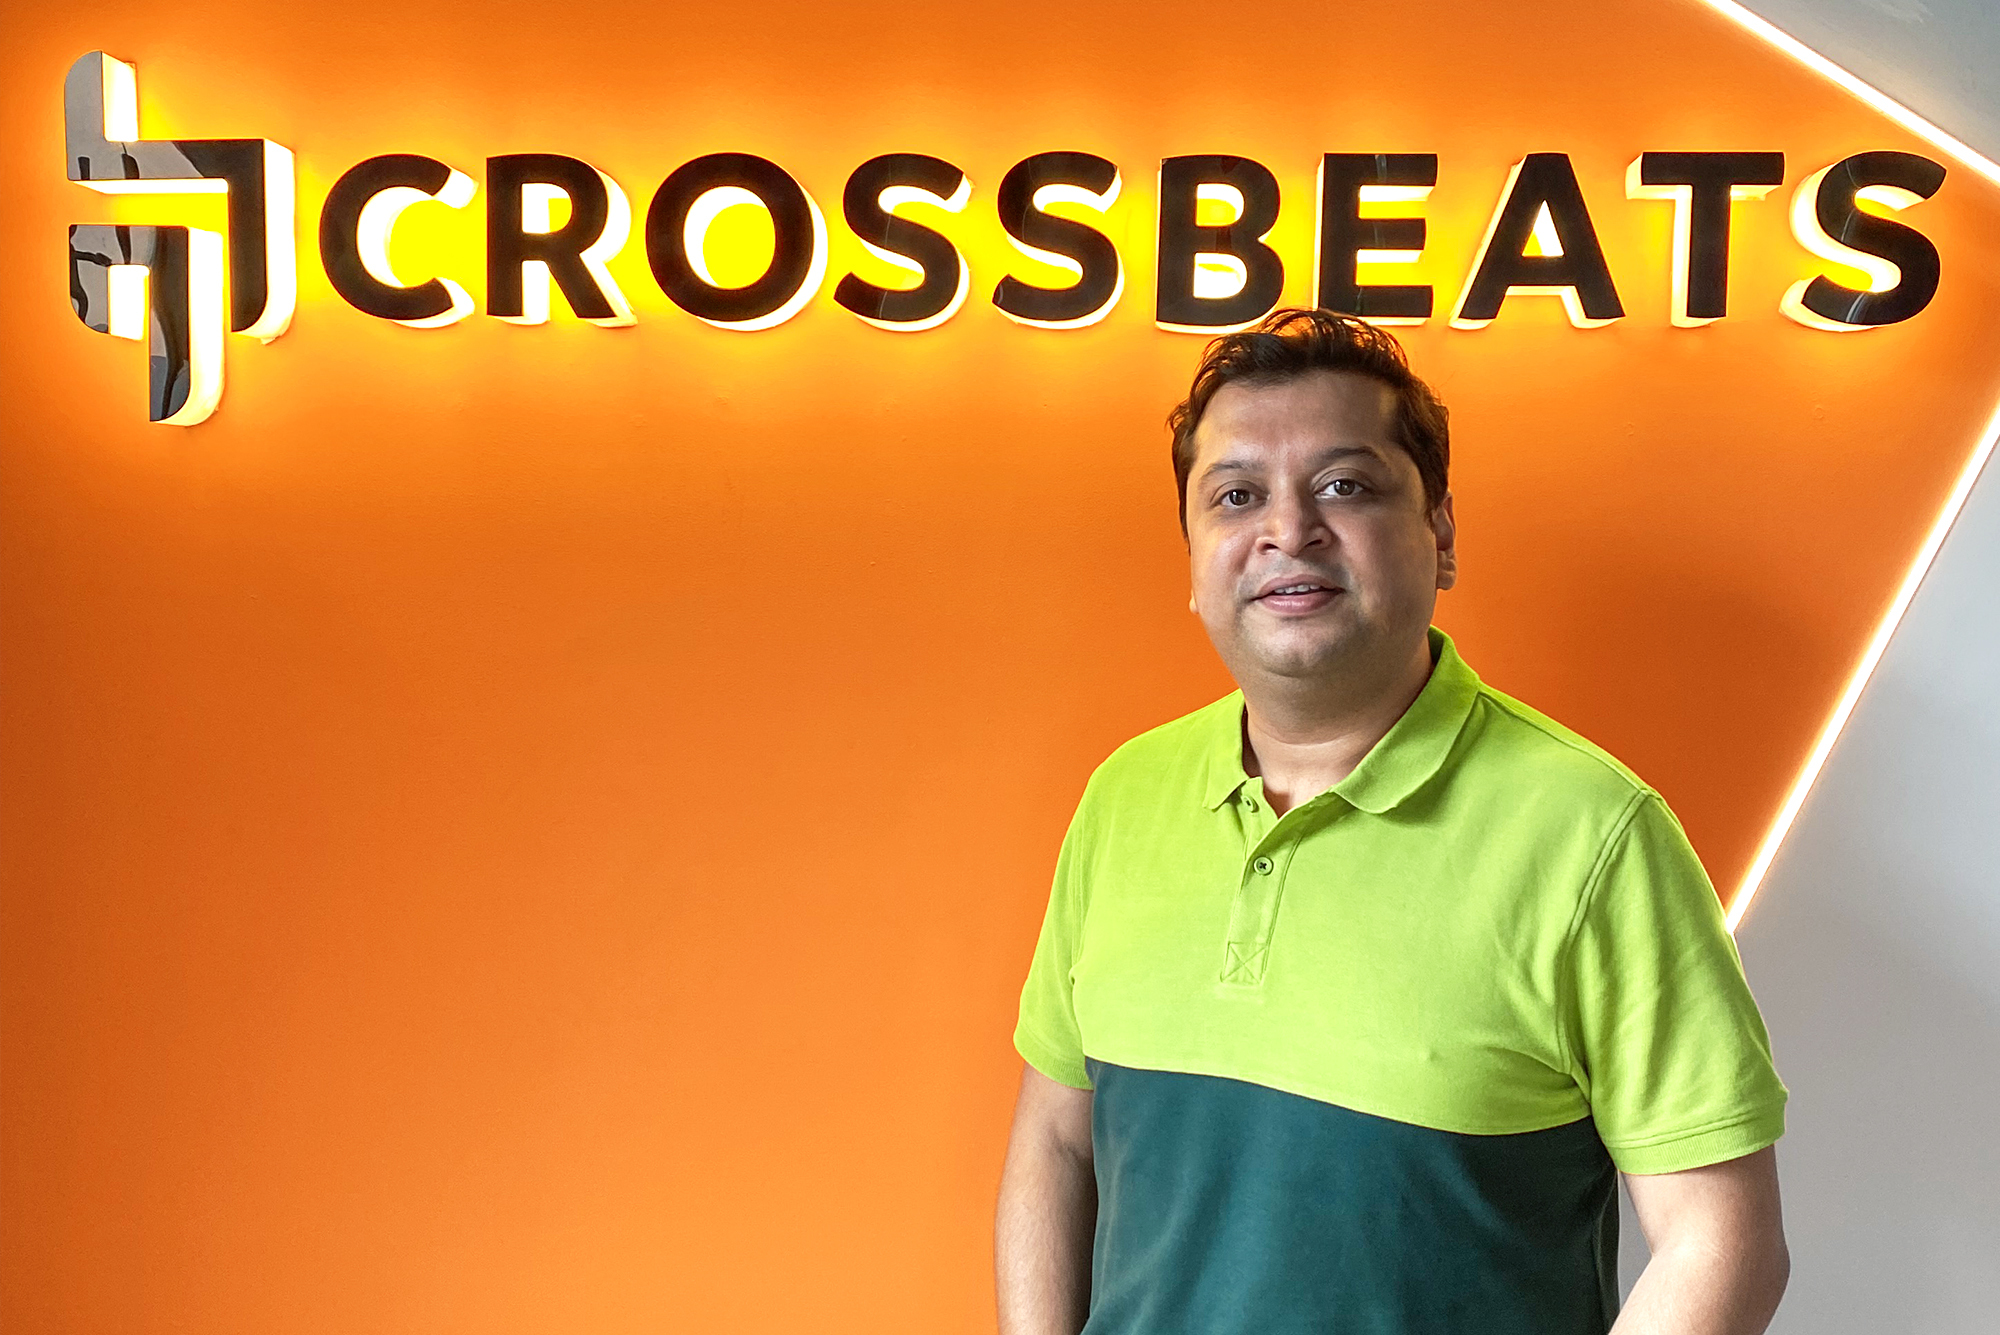 Archit Agarwal, Co-founder, Crossbeats